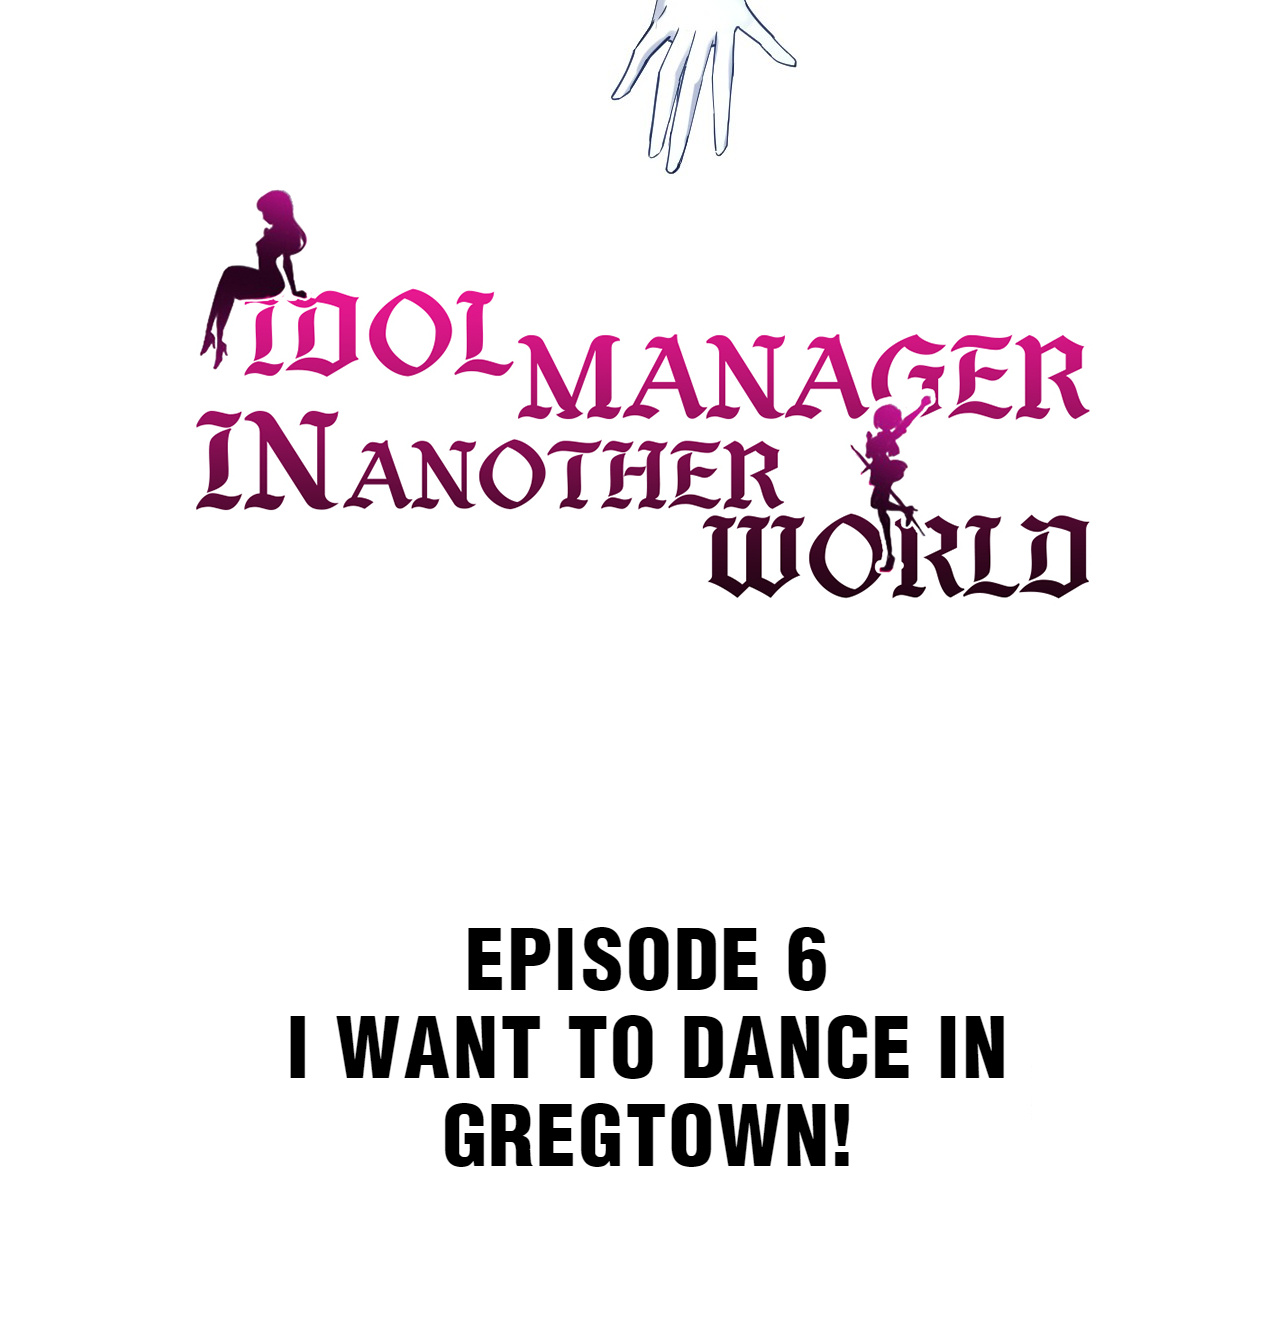 Idol Manager In Another World - Page 2